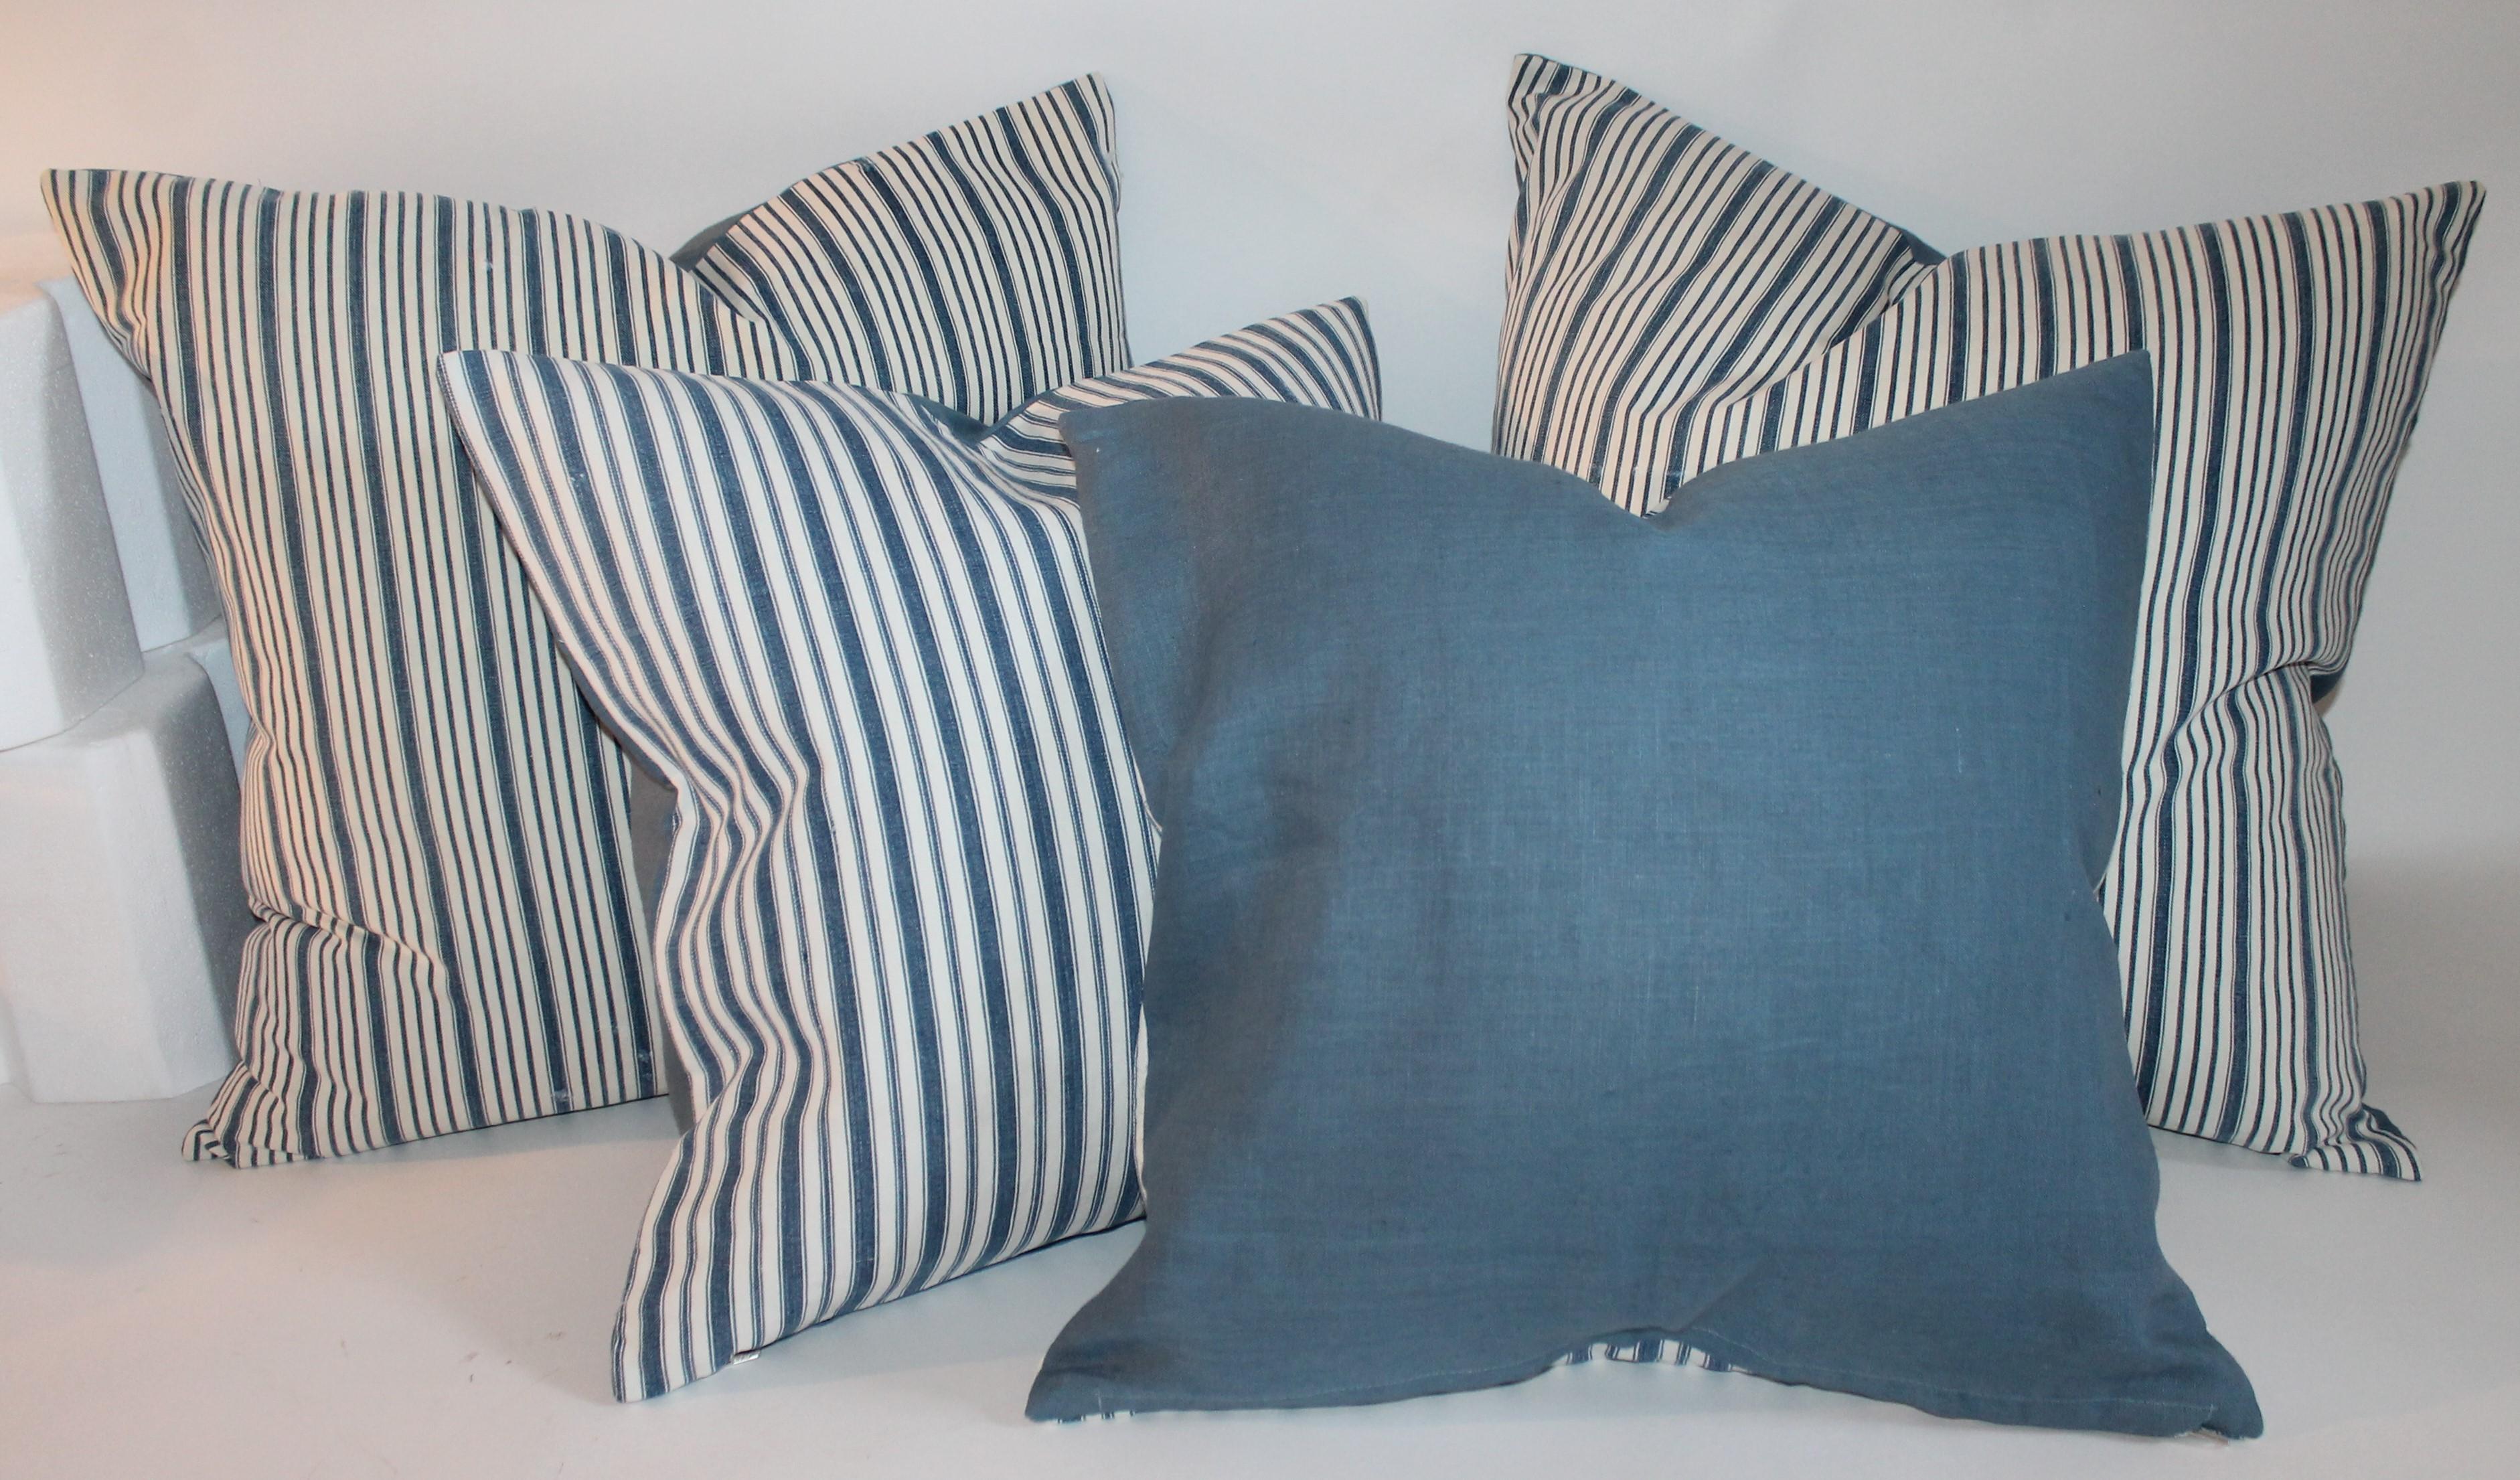 These two pairs of 19th century blue and white ticking pillows are in good condition. The backings are in cotton linen.
Large pair of pillows - 22 x 22
Smaller pair of pillows -20 x 20.